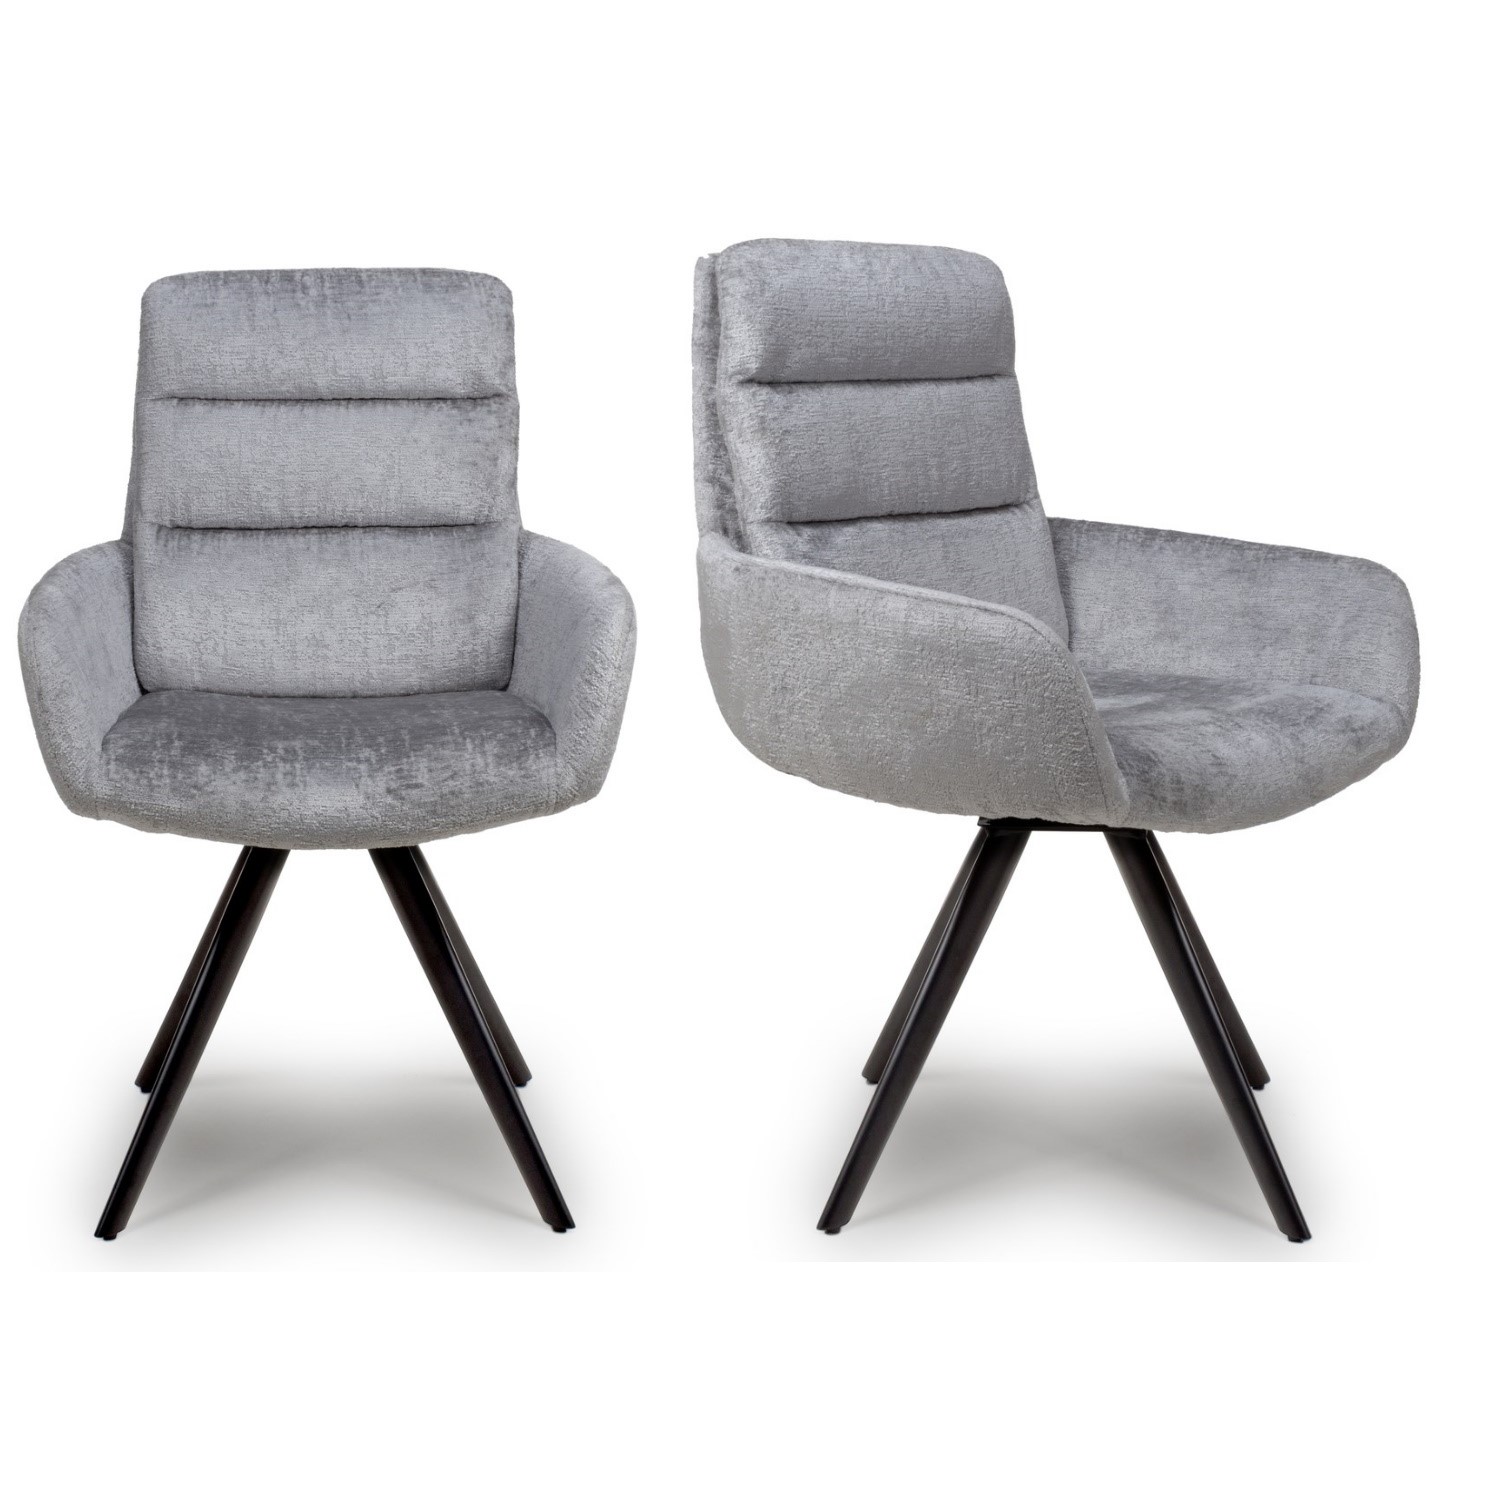 Photo of Set of 2 silver swivel dining chairs -devan